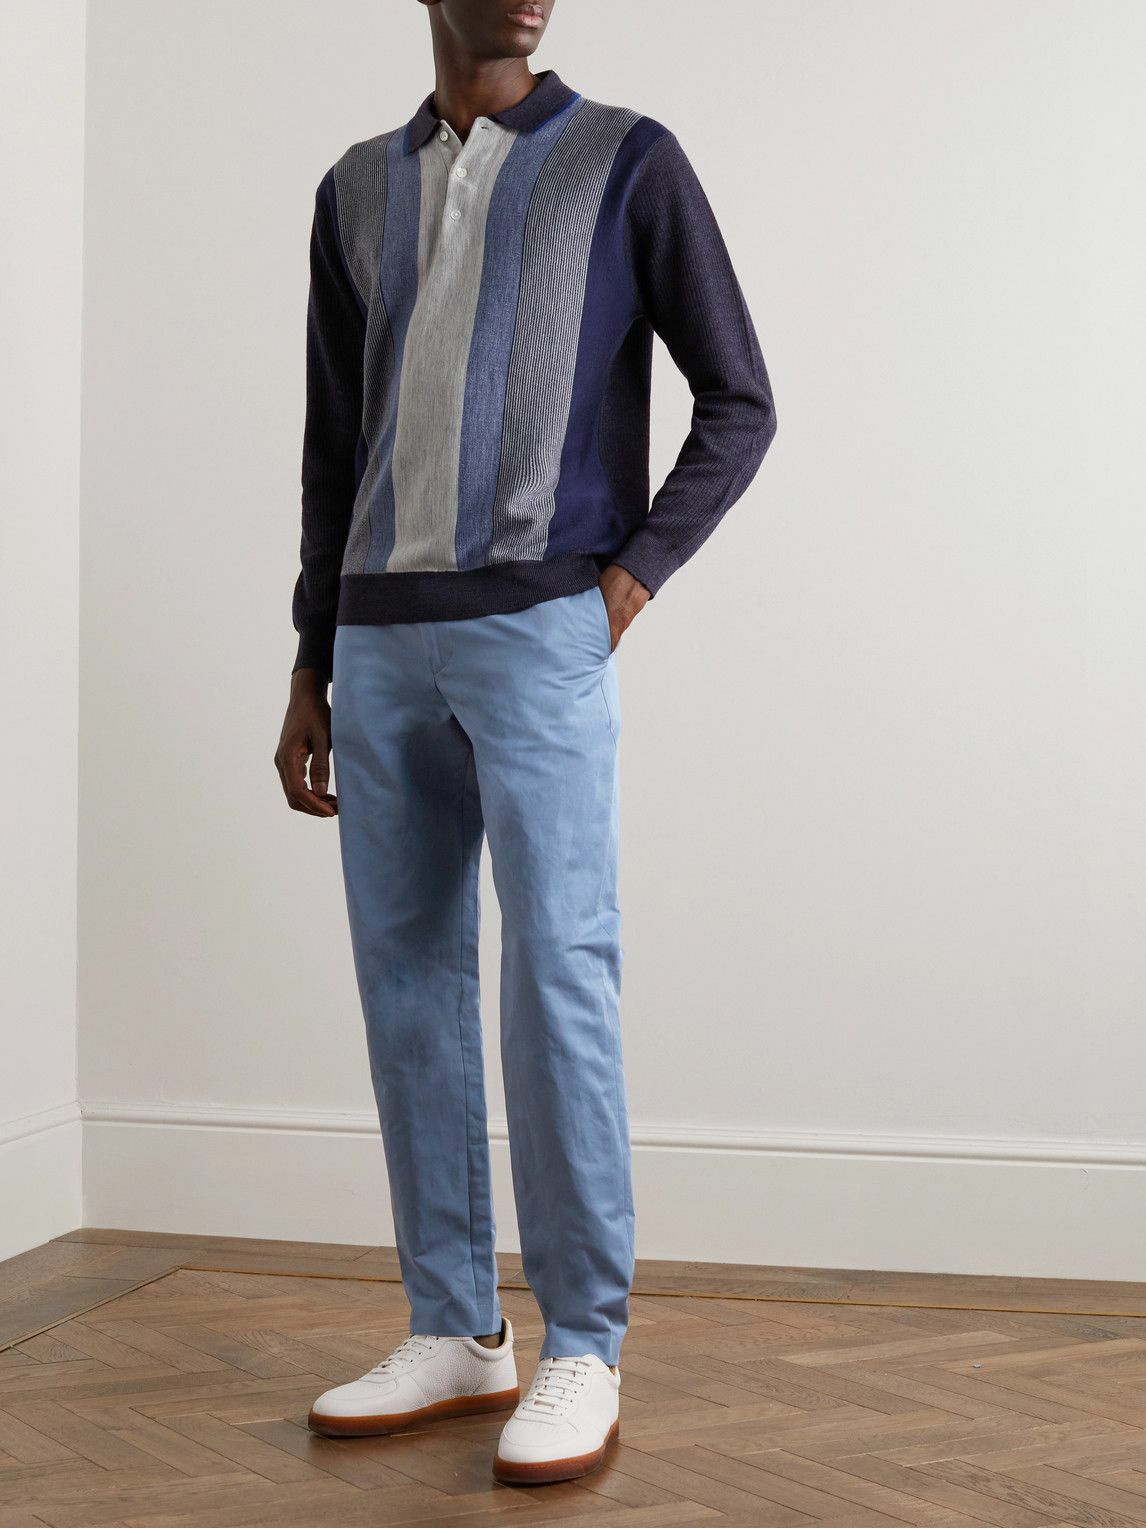 Paul Smith Ps By Slim Fit Linen Suit Trousers, $340 | MR PORTER | Lookastic